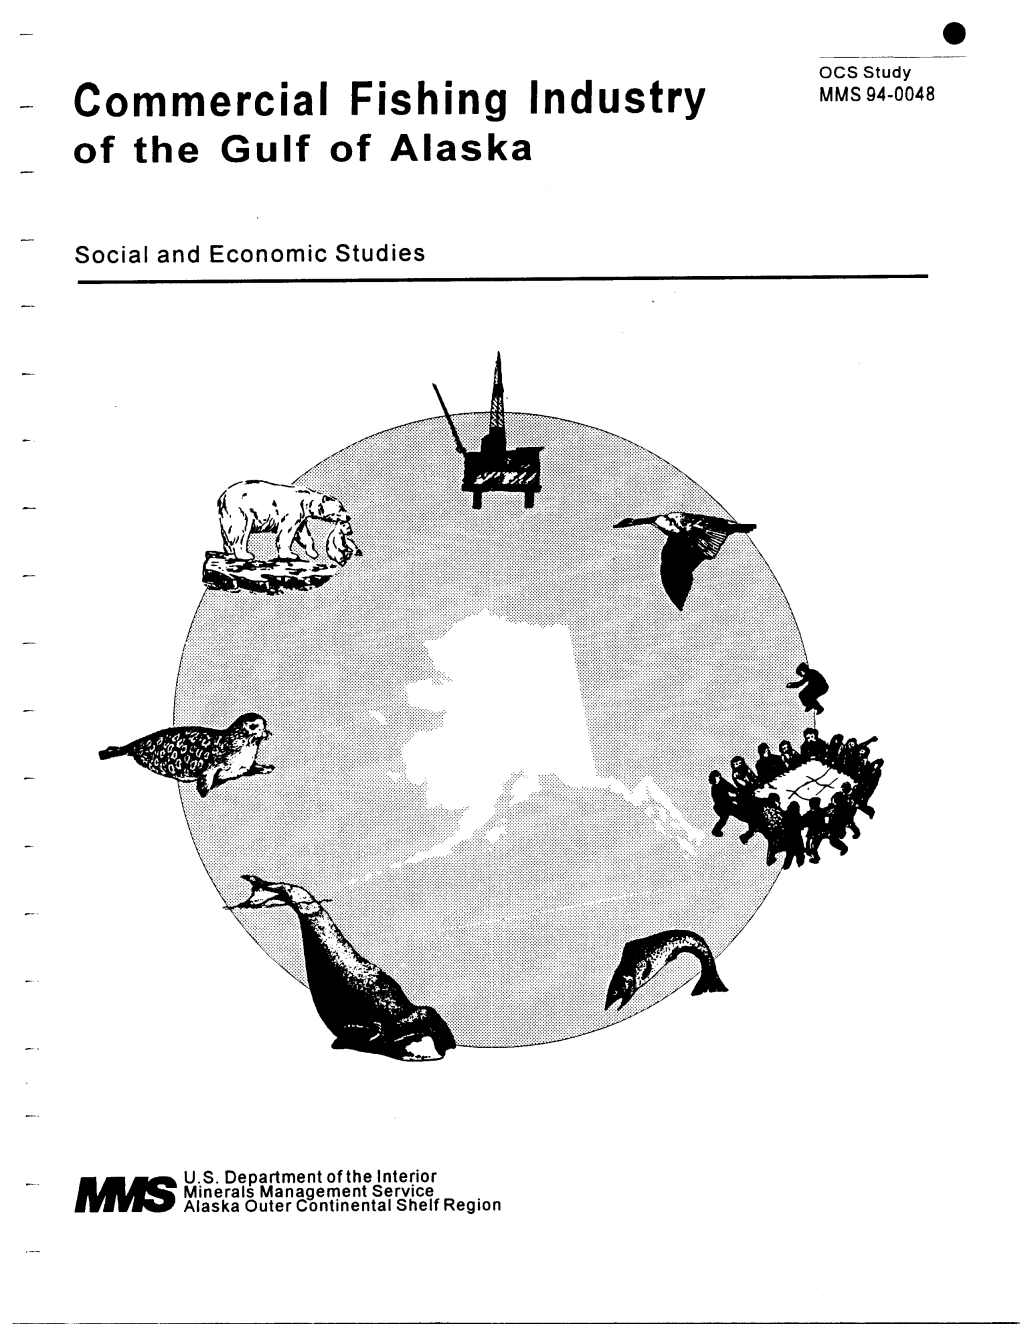 Commercial Fishing Industry of the Gulf of Alaska